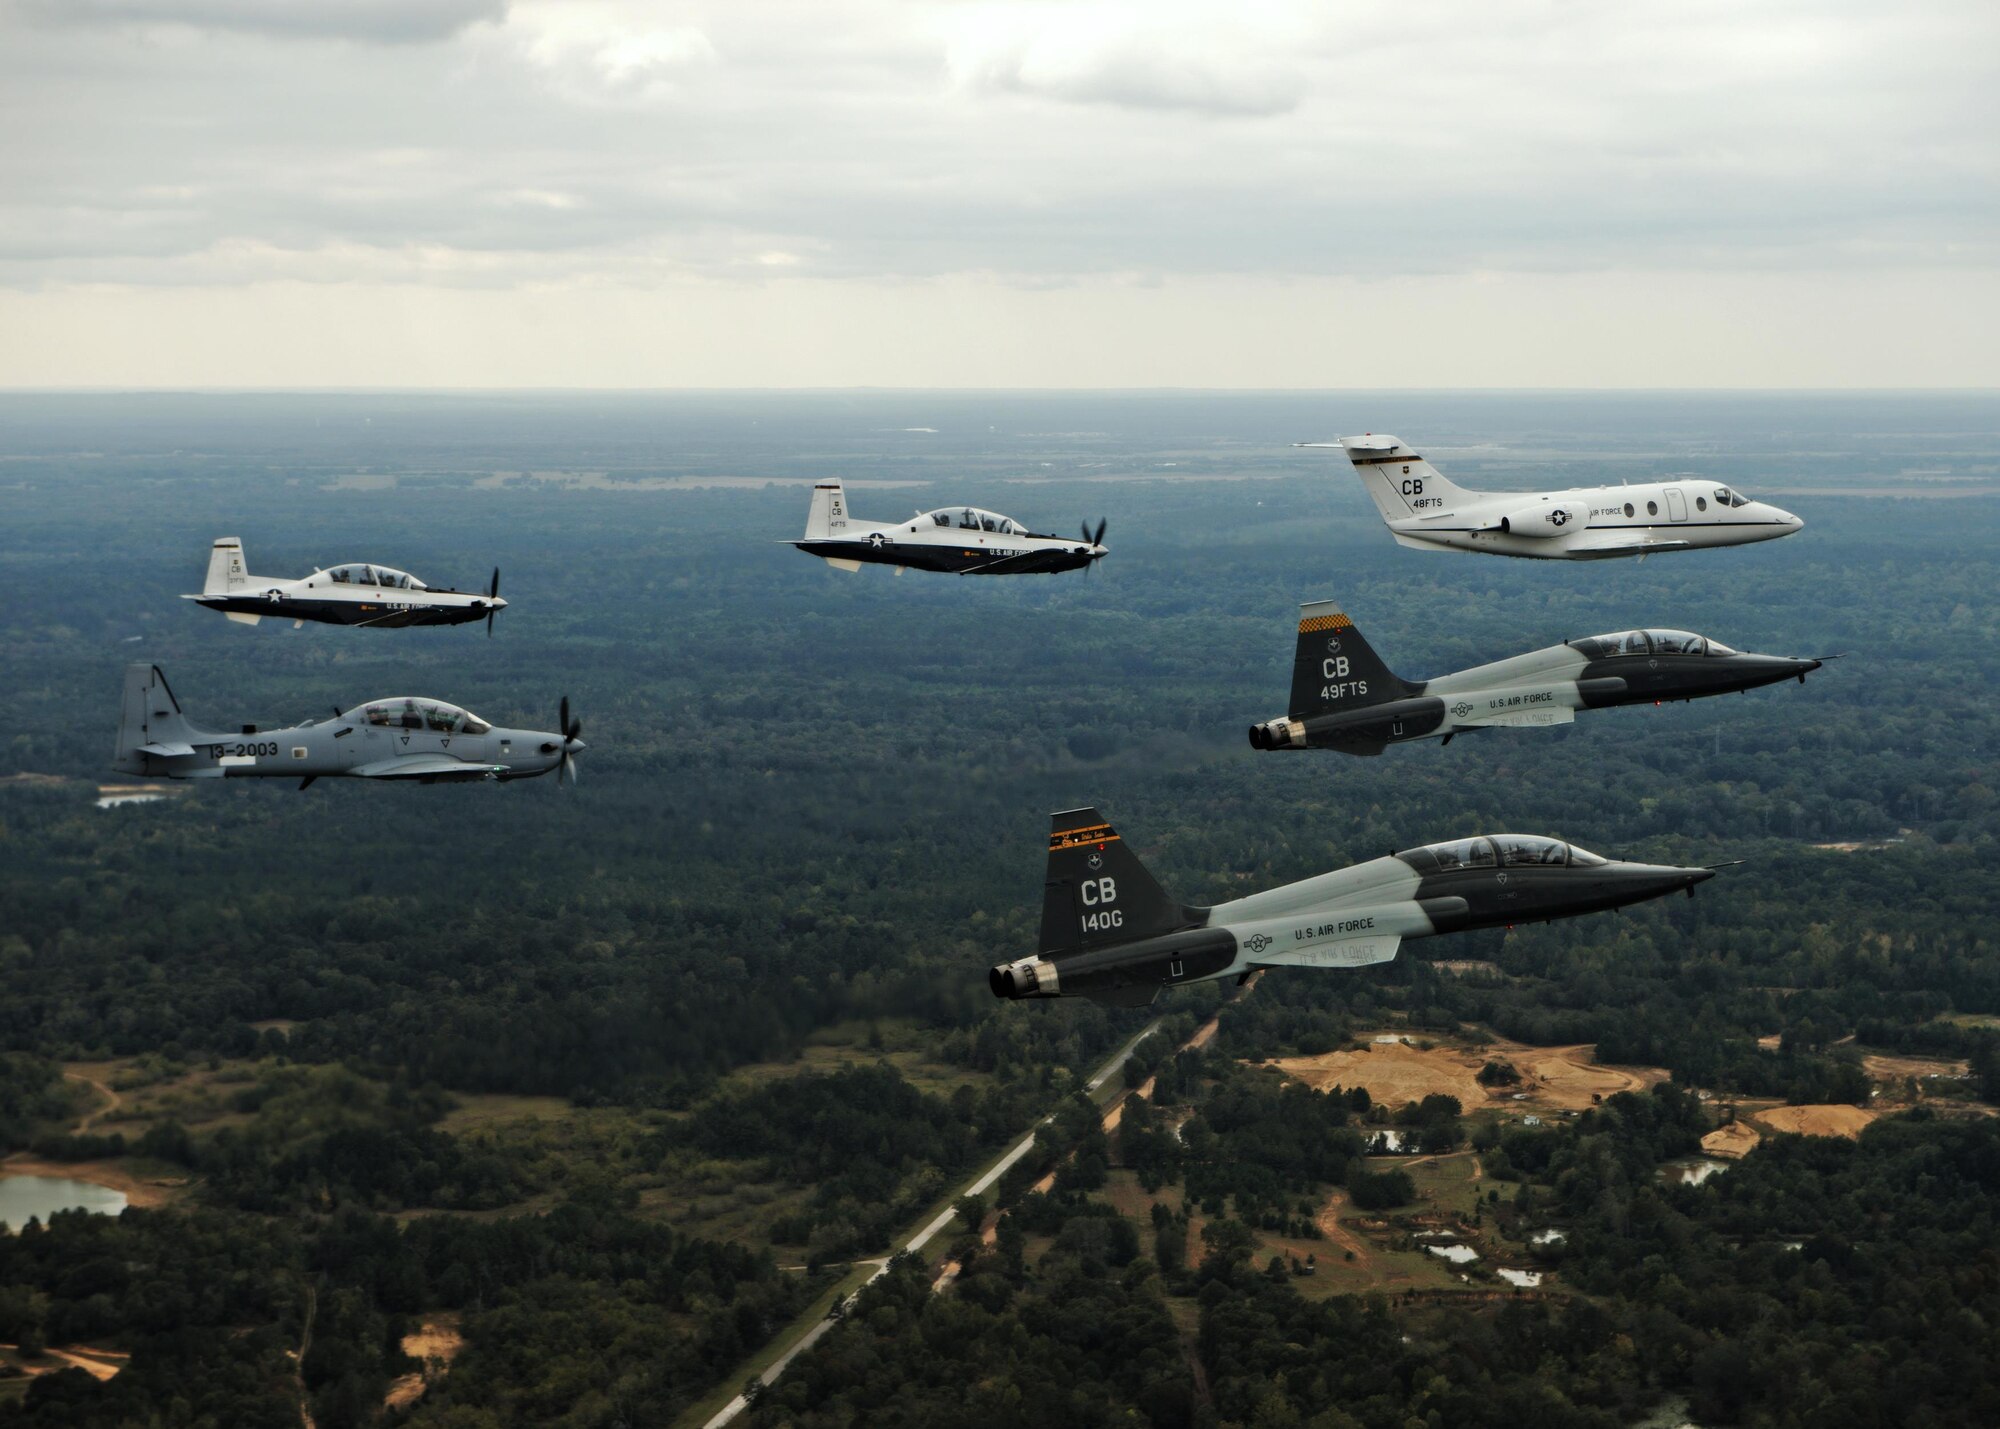 An aircraft from each of the 14th Flying Training Wing flying squadrons were represented in a dissimilar formation in the vicinity of Columbus Air Force Base, Mississippi Oct. 1, 2015.